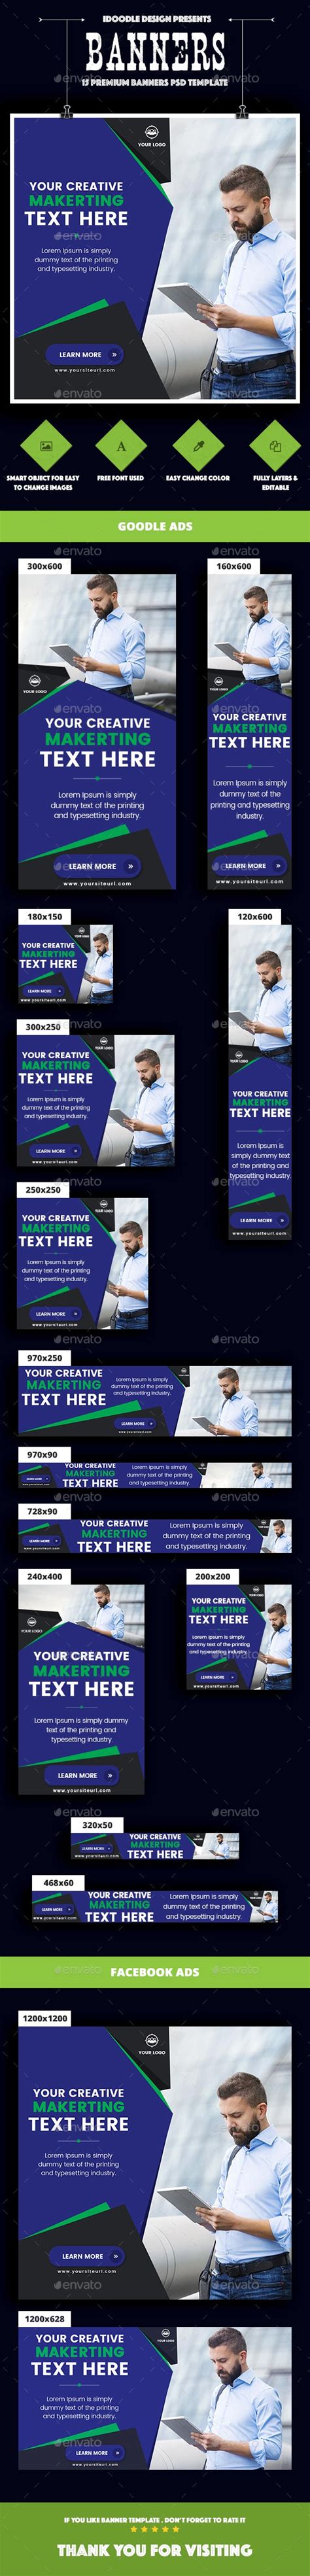 Banner Ads Multipurpose Business Corporate Banners Ad By Idoodle